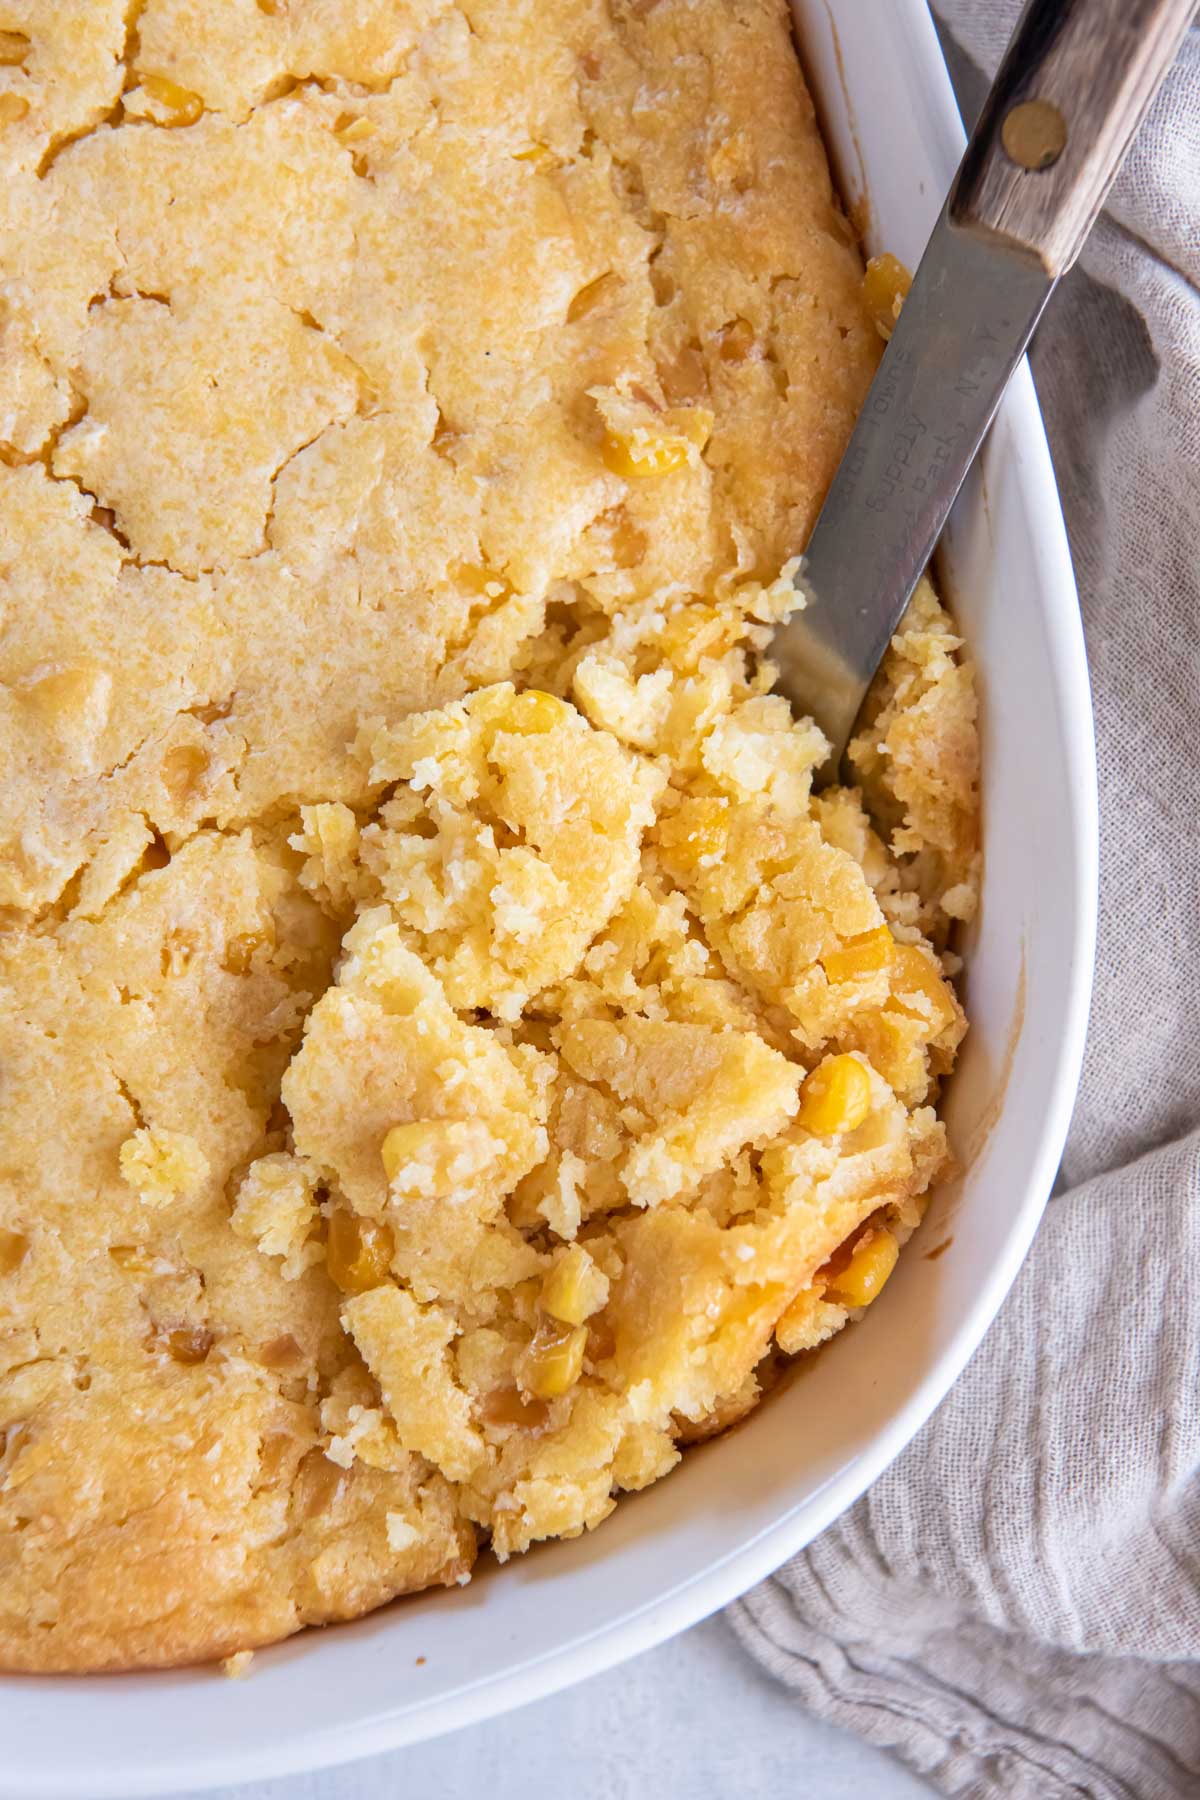 Corn casserole in baking dish with serving spoon.